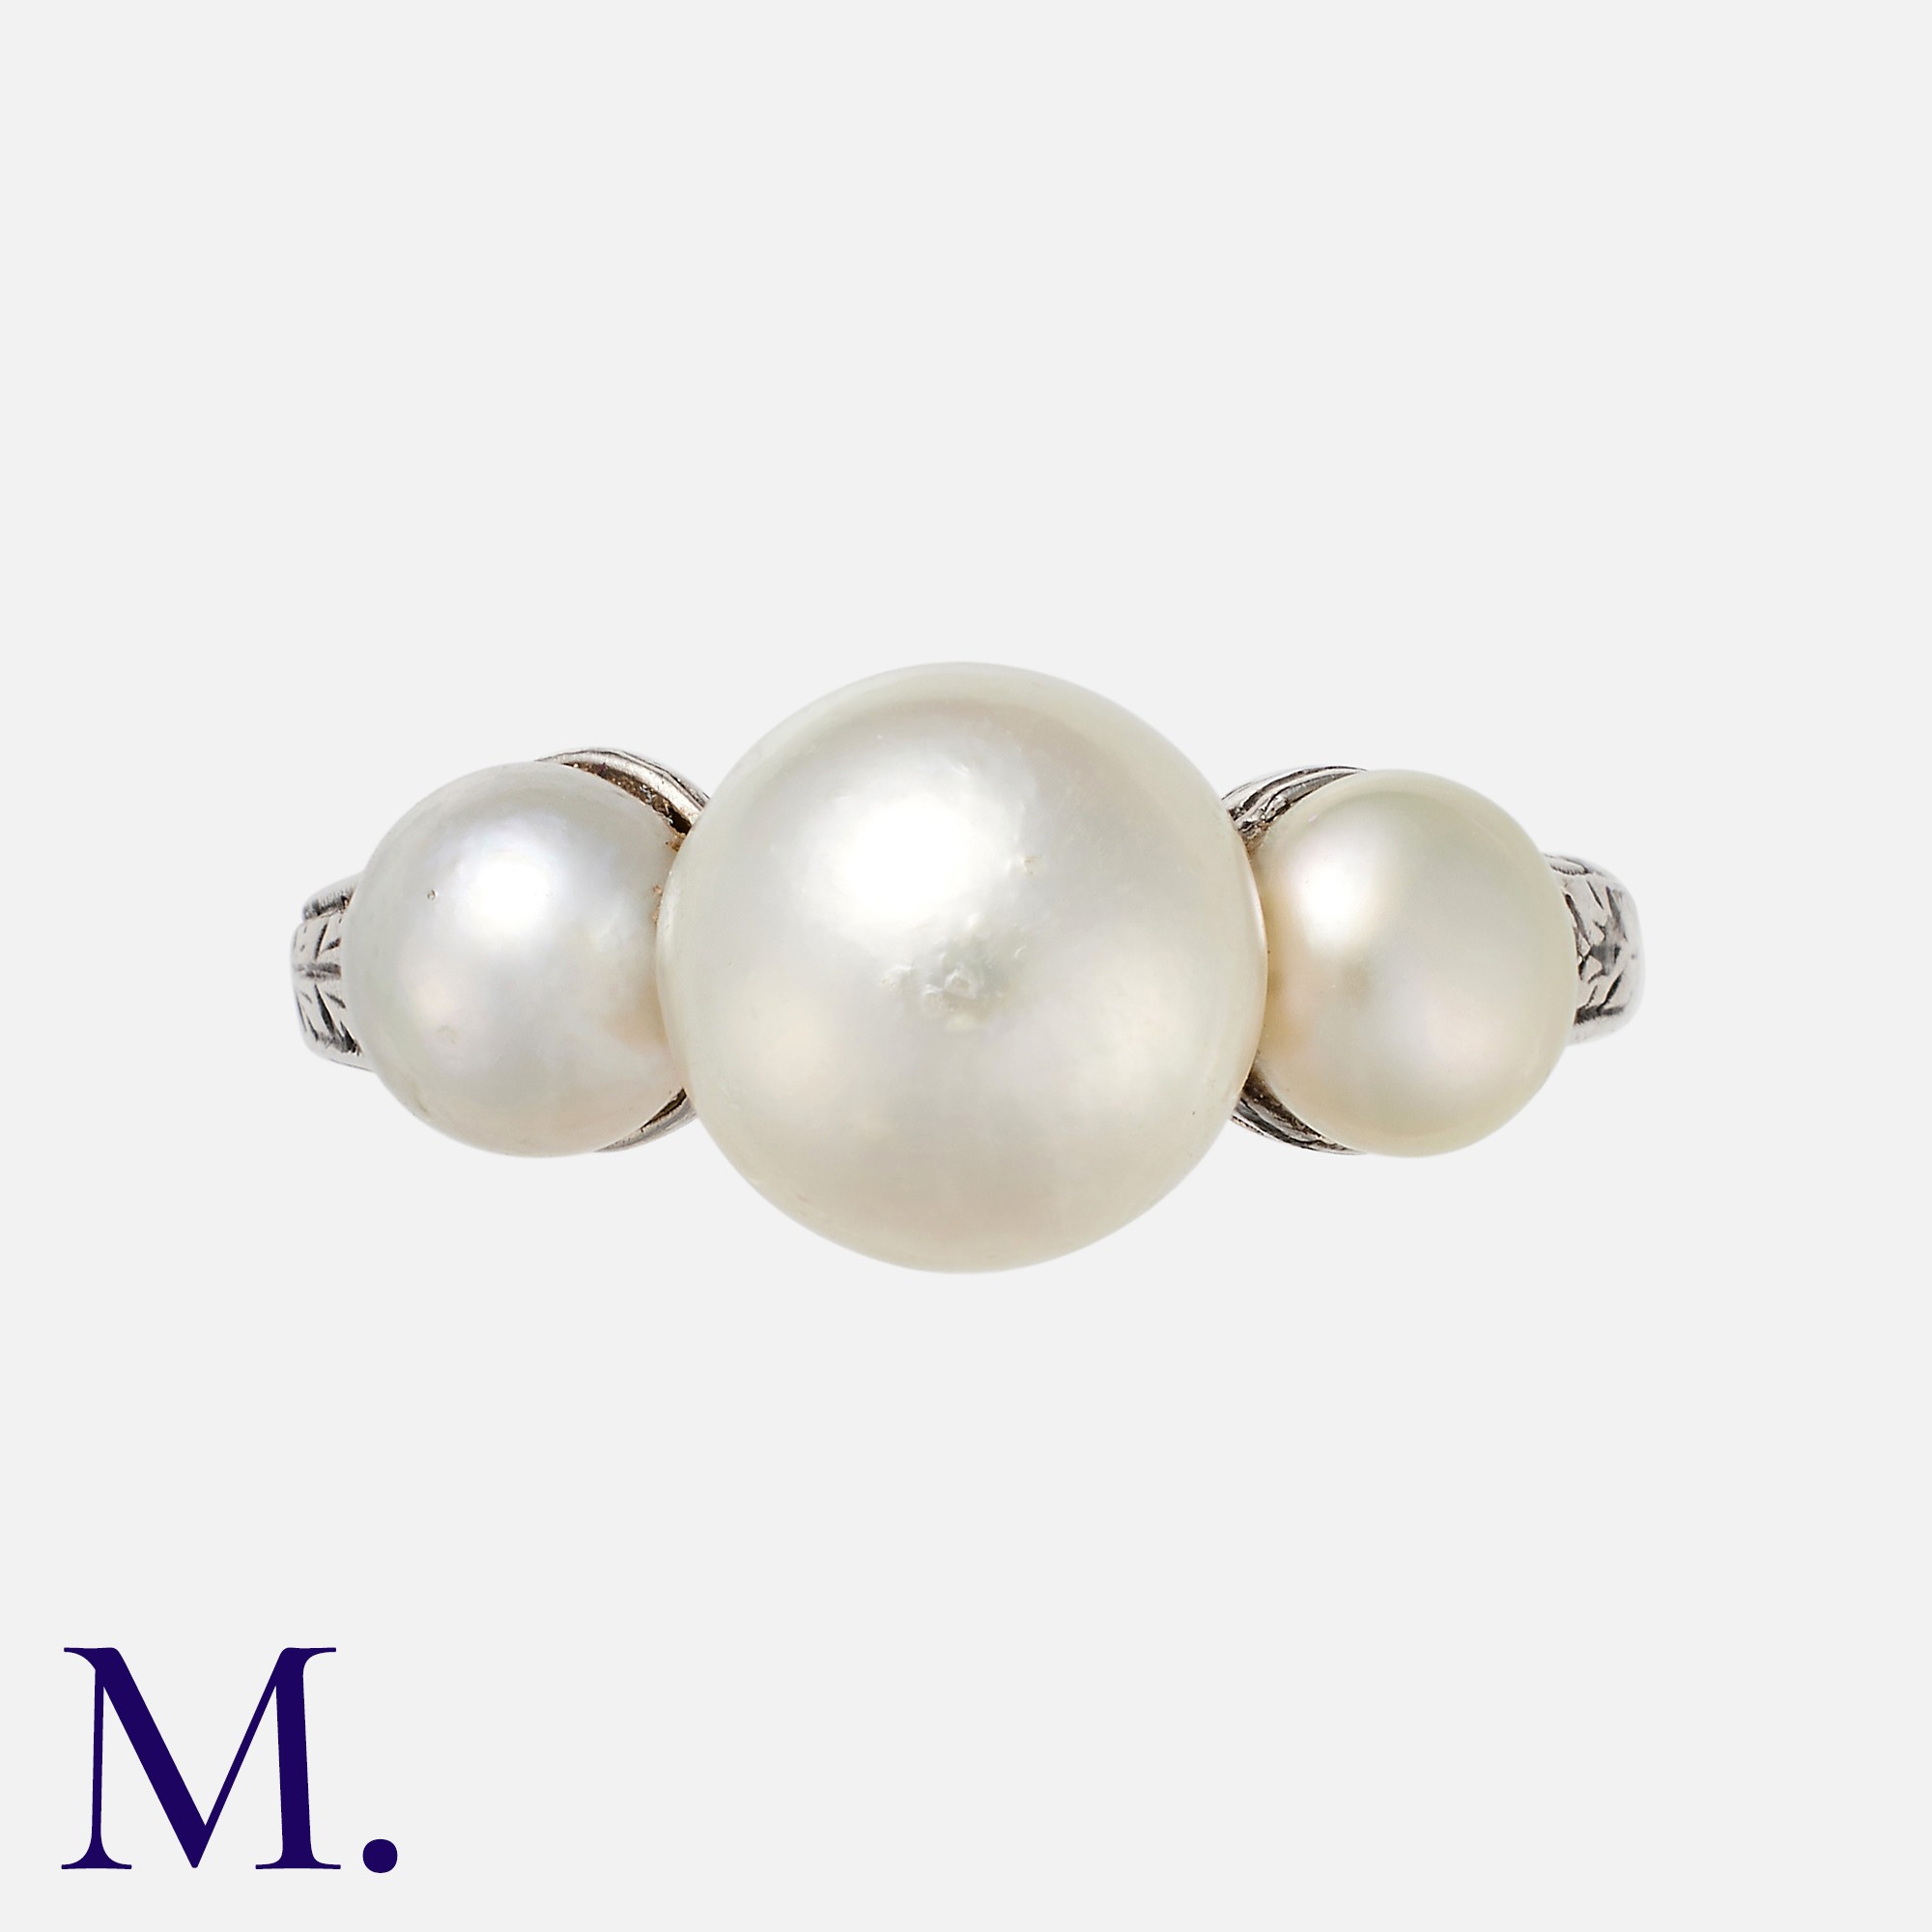 A Natural Pearl Three Stone Ring in platinum set with three pearls to an engraved band. With a